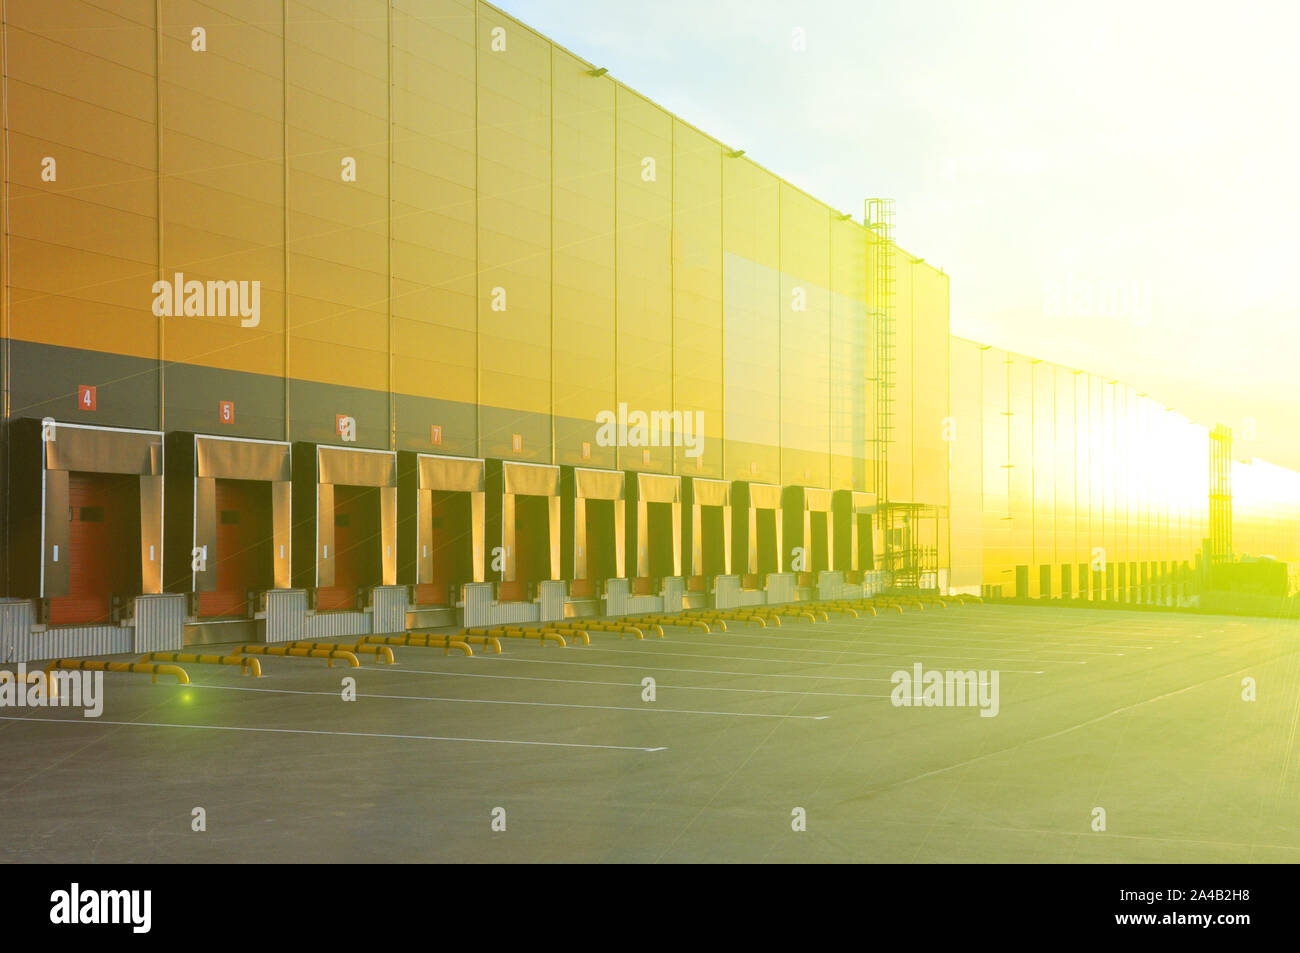 Modern warehouse complex. View of loading docks Stock Photo